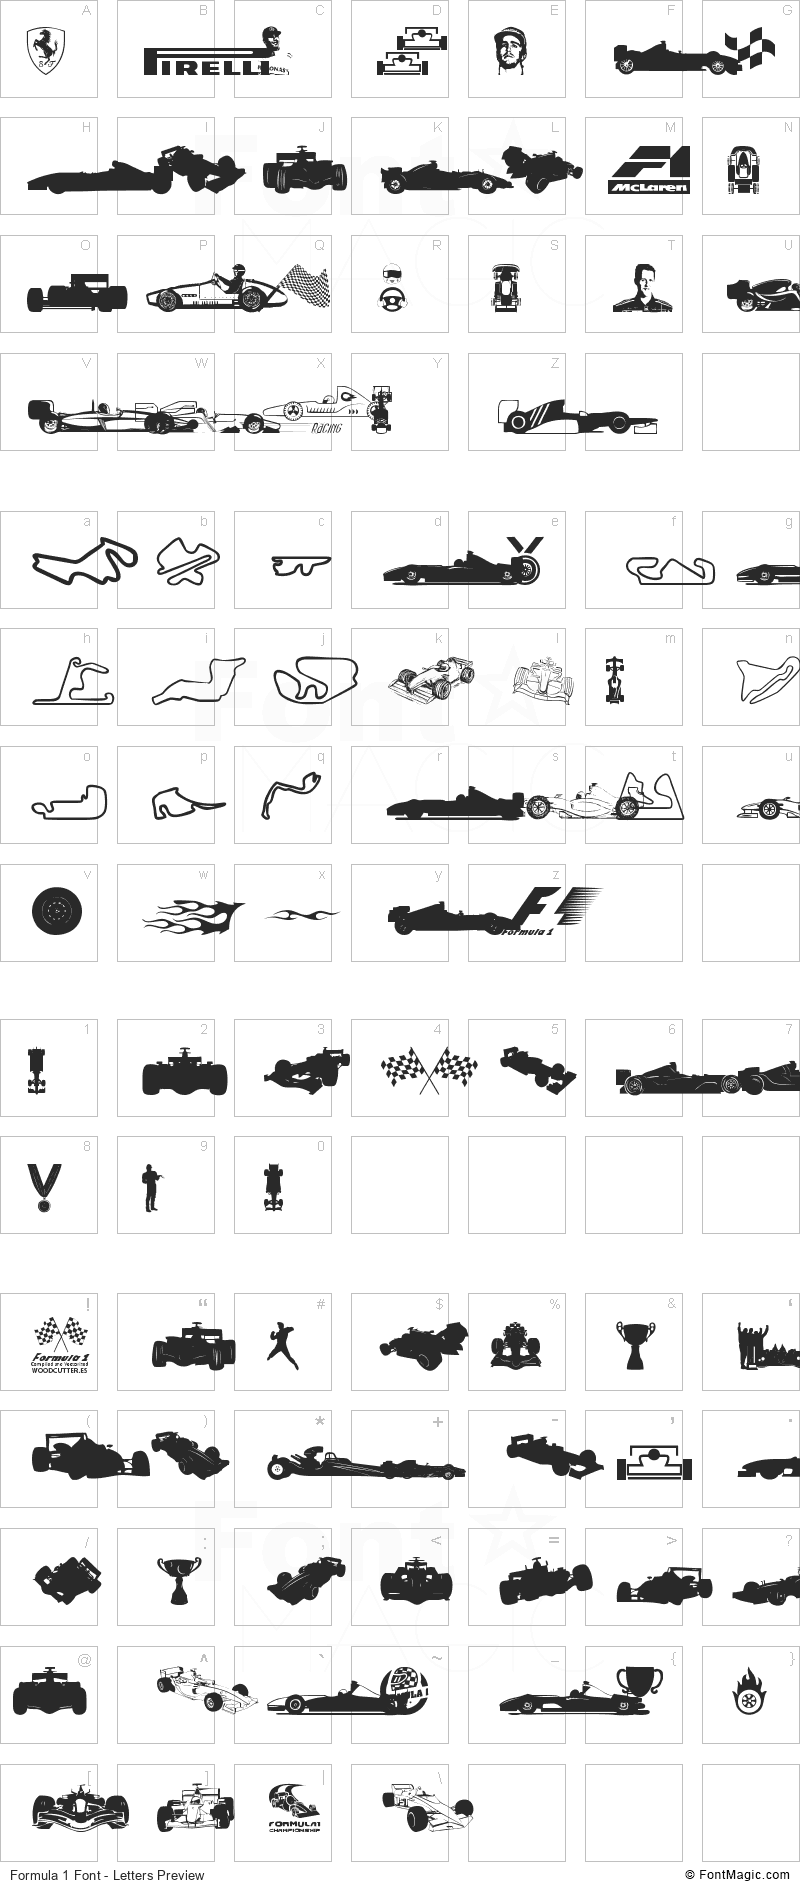 Formula 1 Font - All Latters Preview Chart